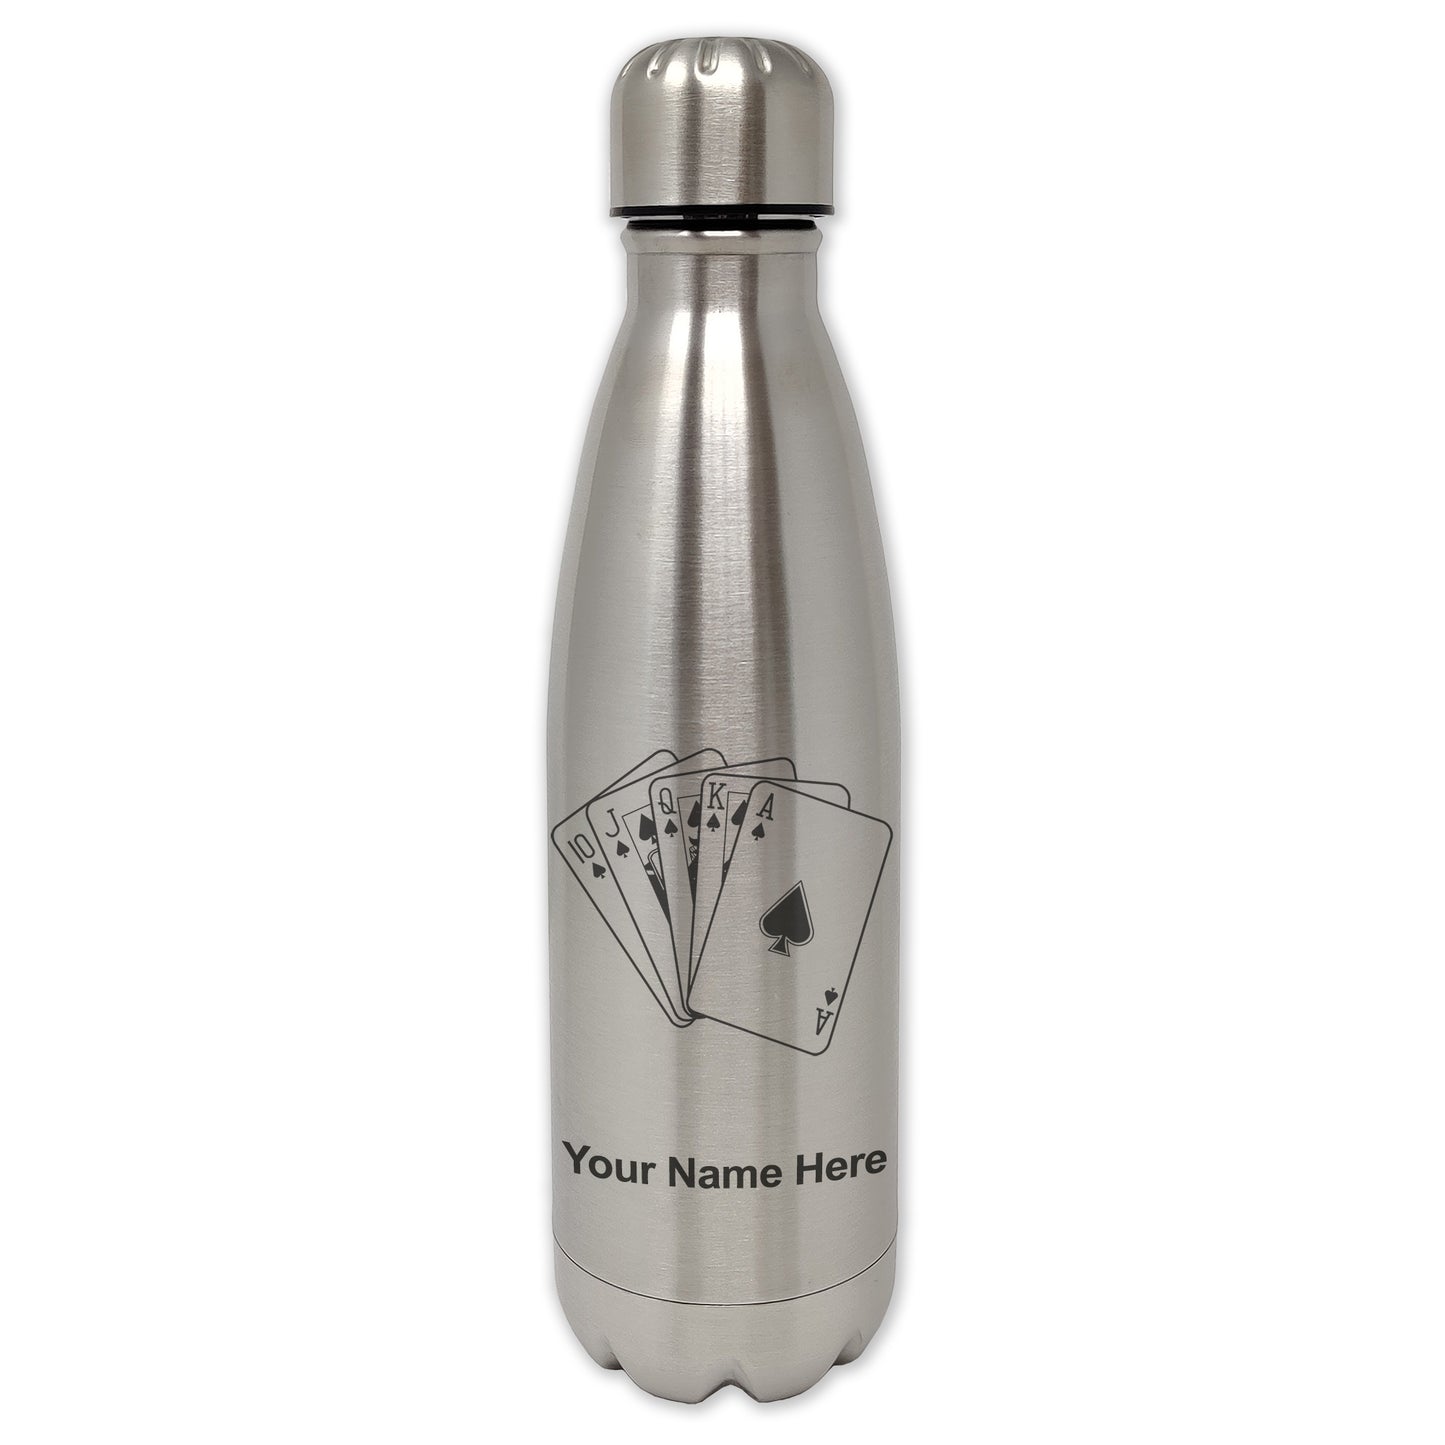 LaserGram Double Wall Water Bottle, Royal Flush Poker Cards, Personalized Engraving Included